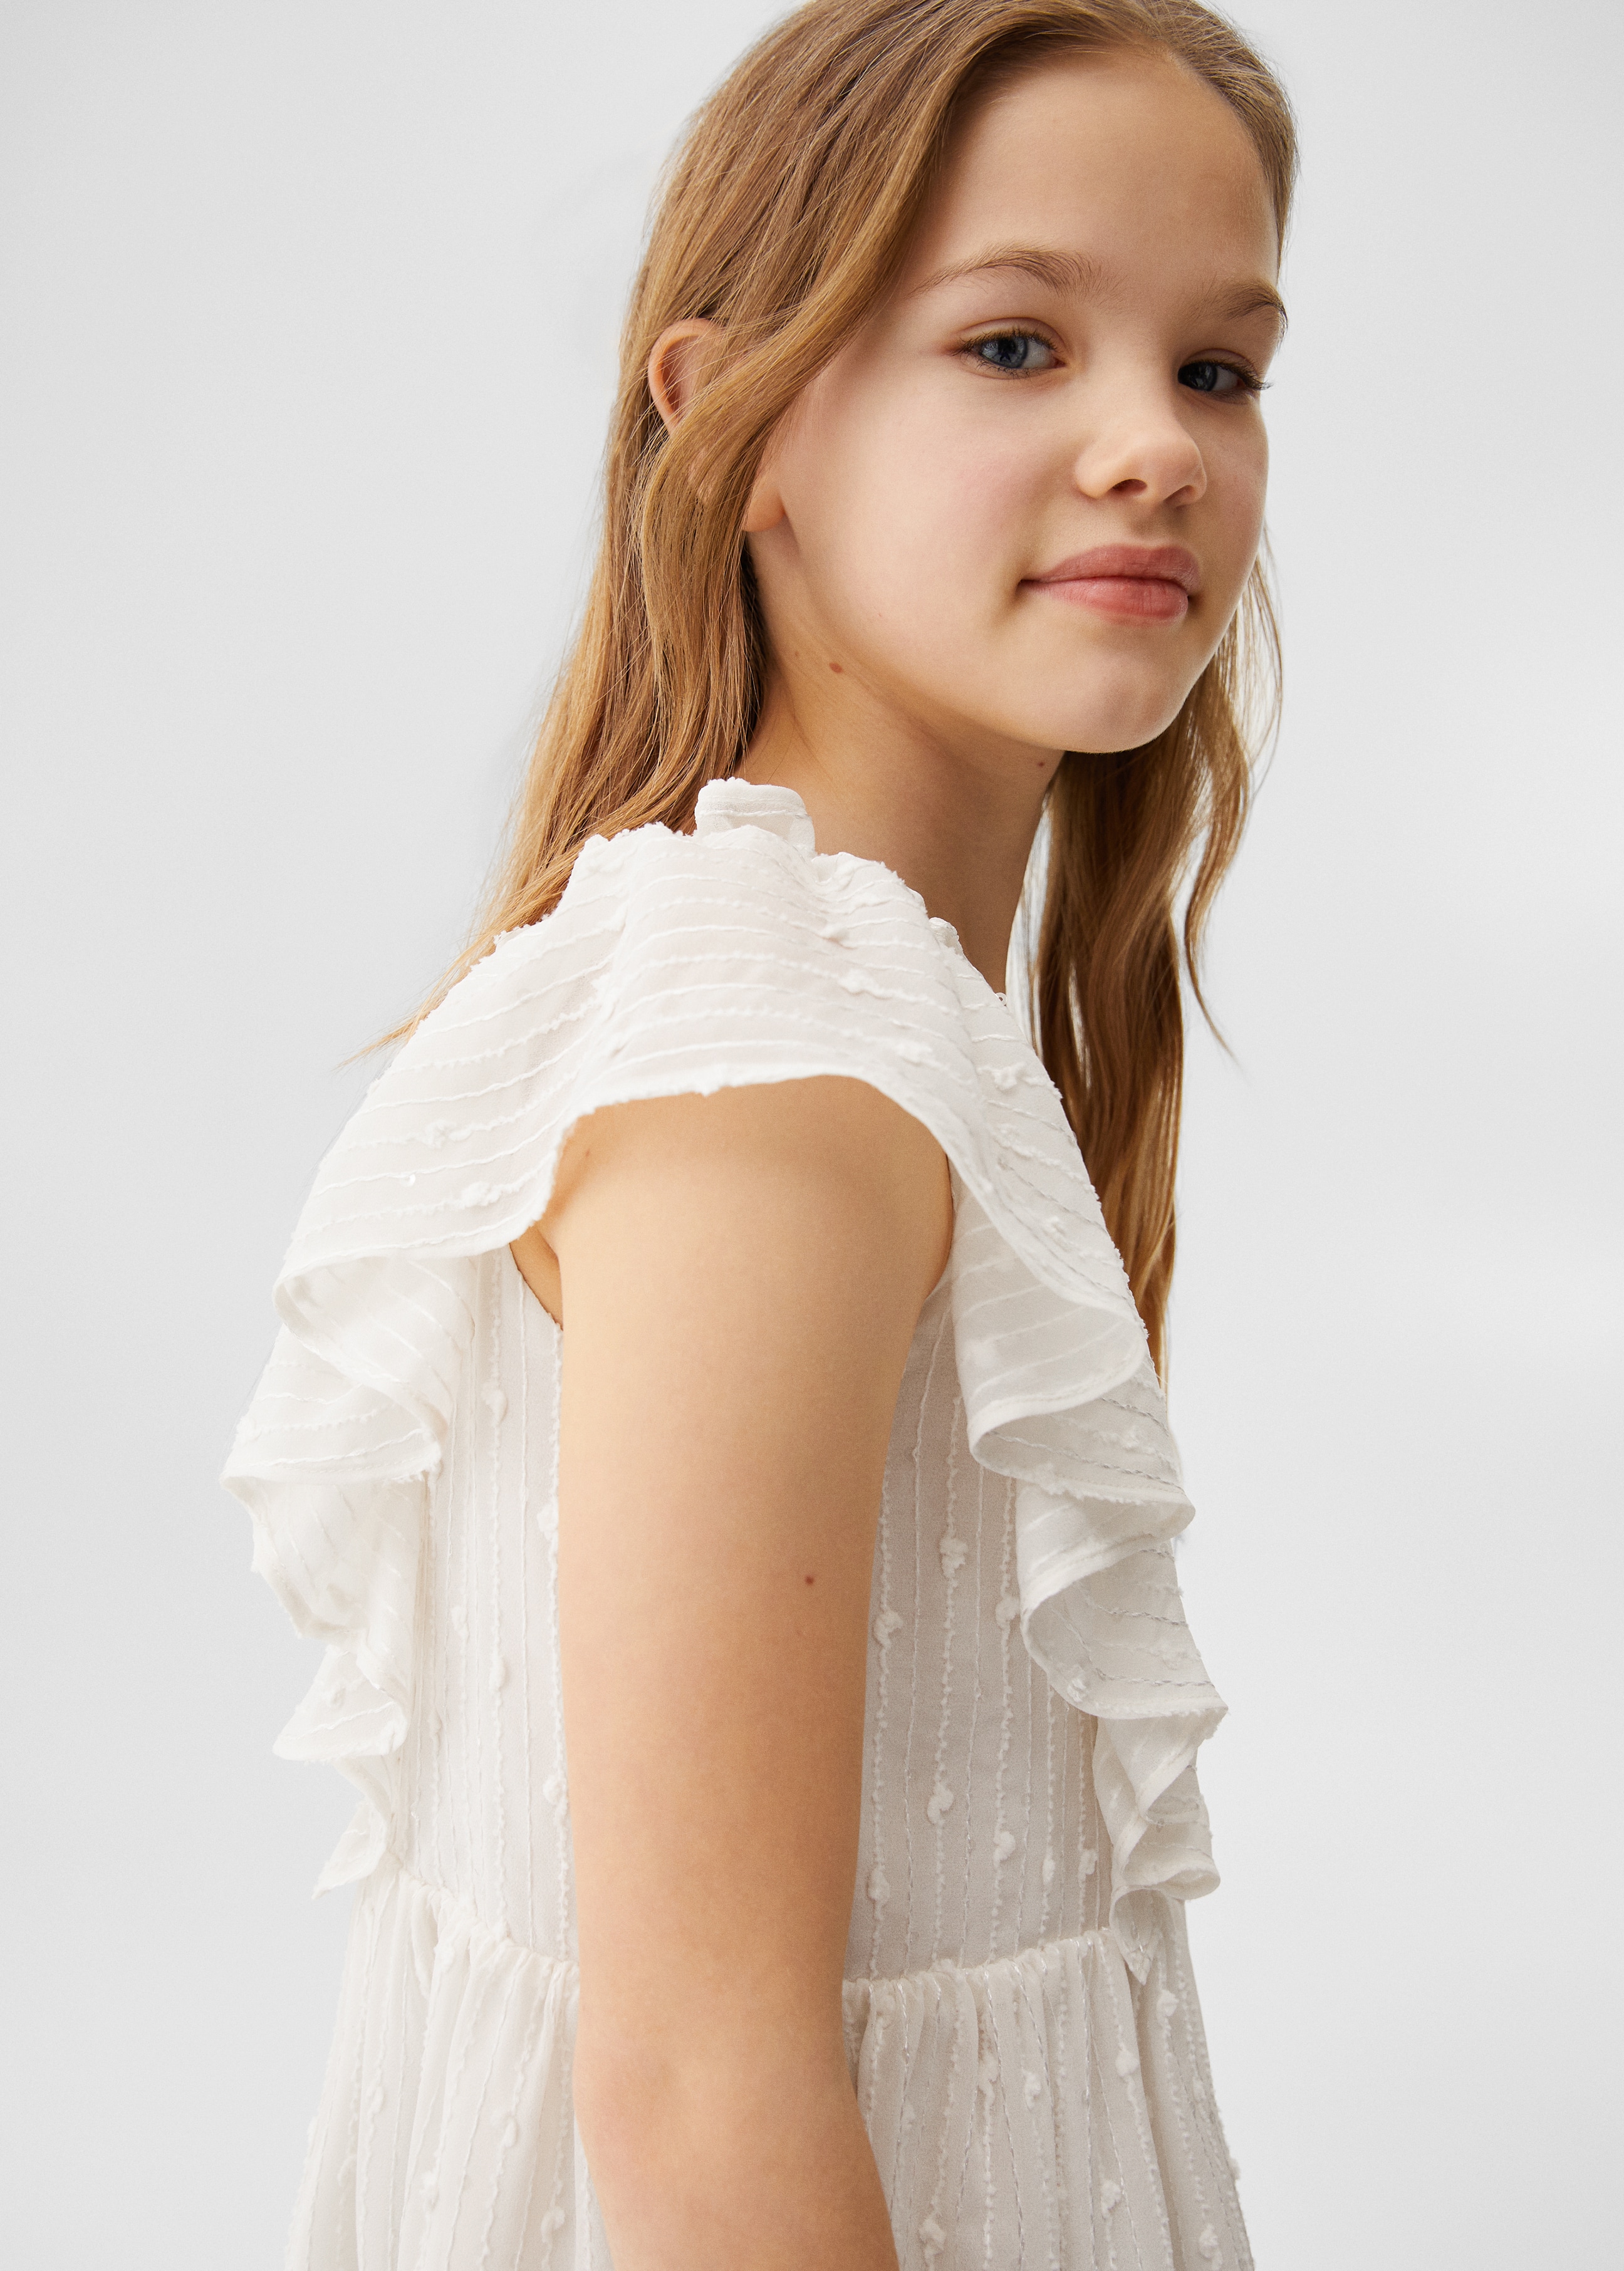 Ruffled dress - Details of the article 1